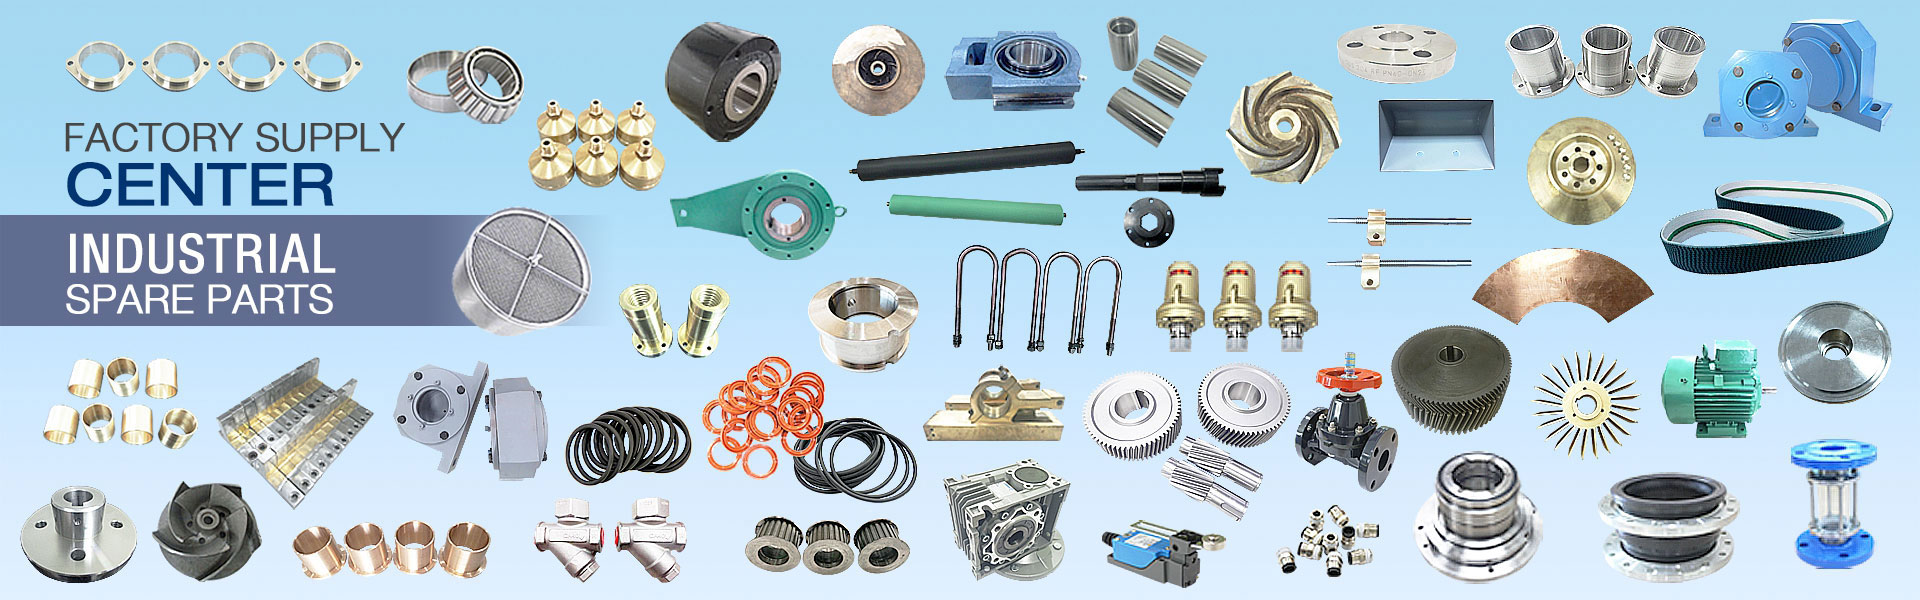 Fully Integrated Industrial Machines and Spare Parts